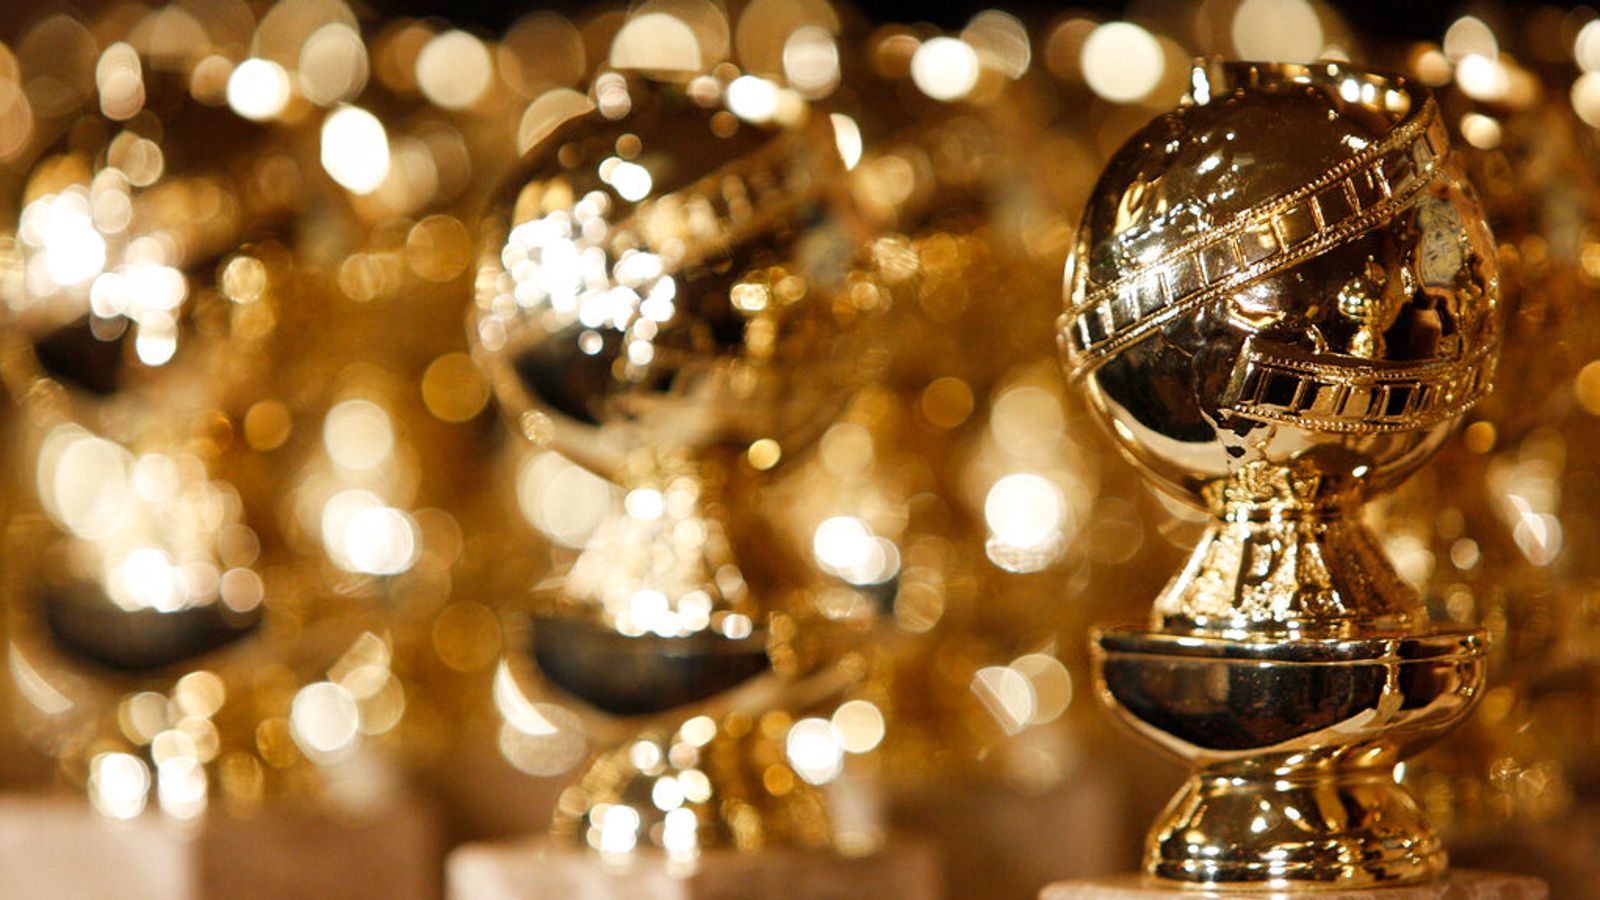 The Golden Globes are back on TV, but will the stars turn up and the viewers tune in?